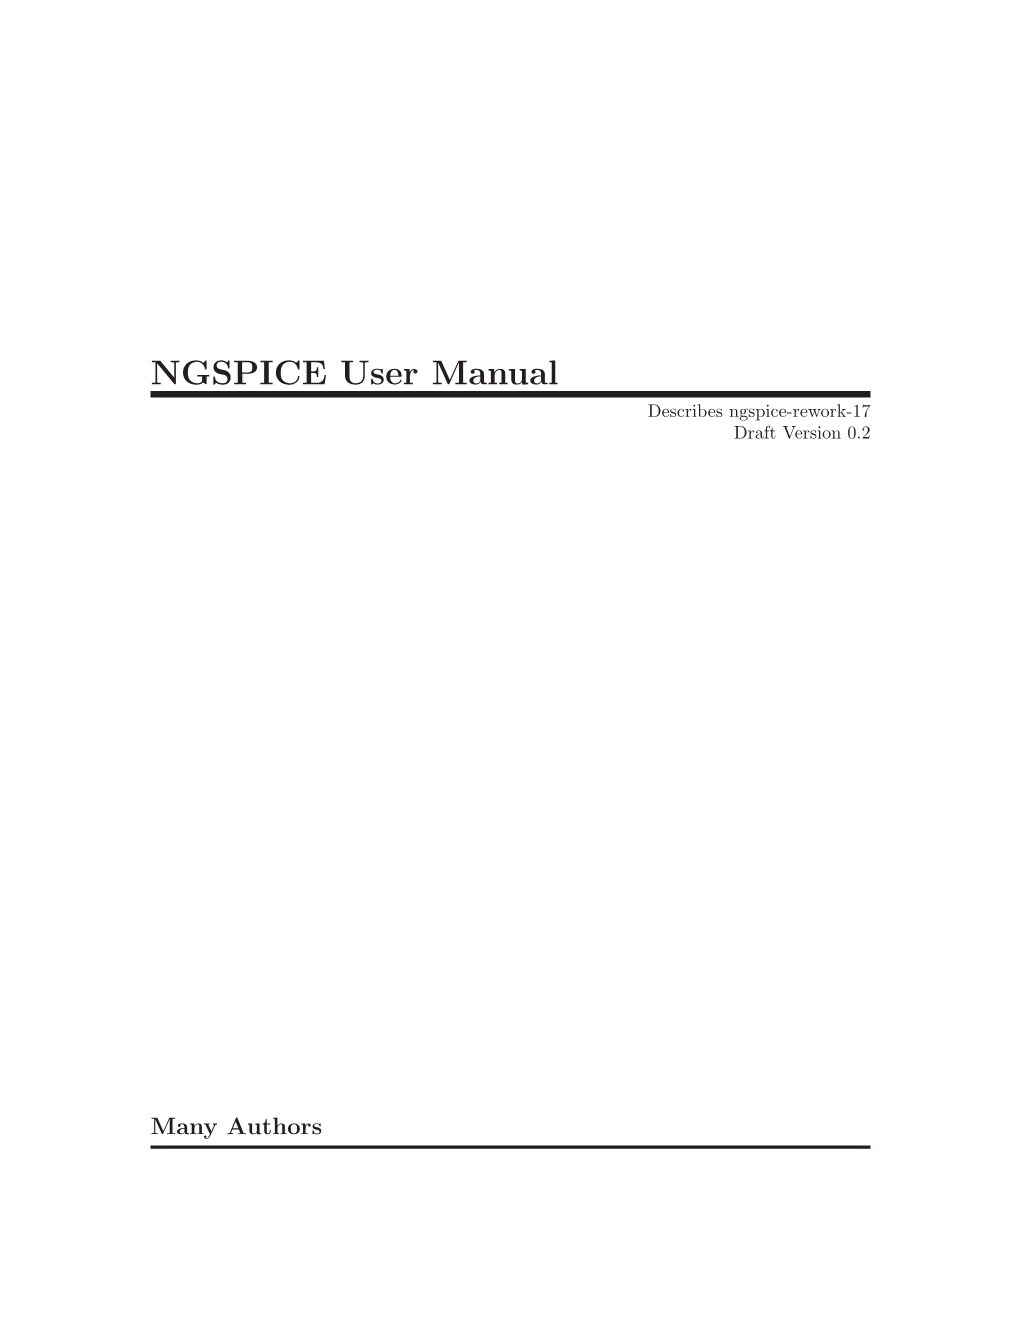 NGSPICE User Manual Describes Ngspice-Rework-17 Draft Version 0.2